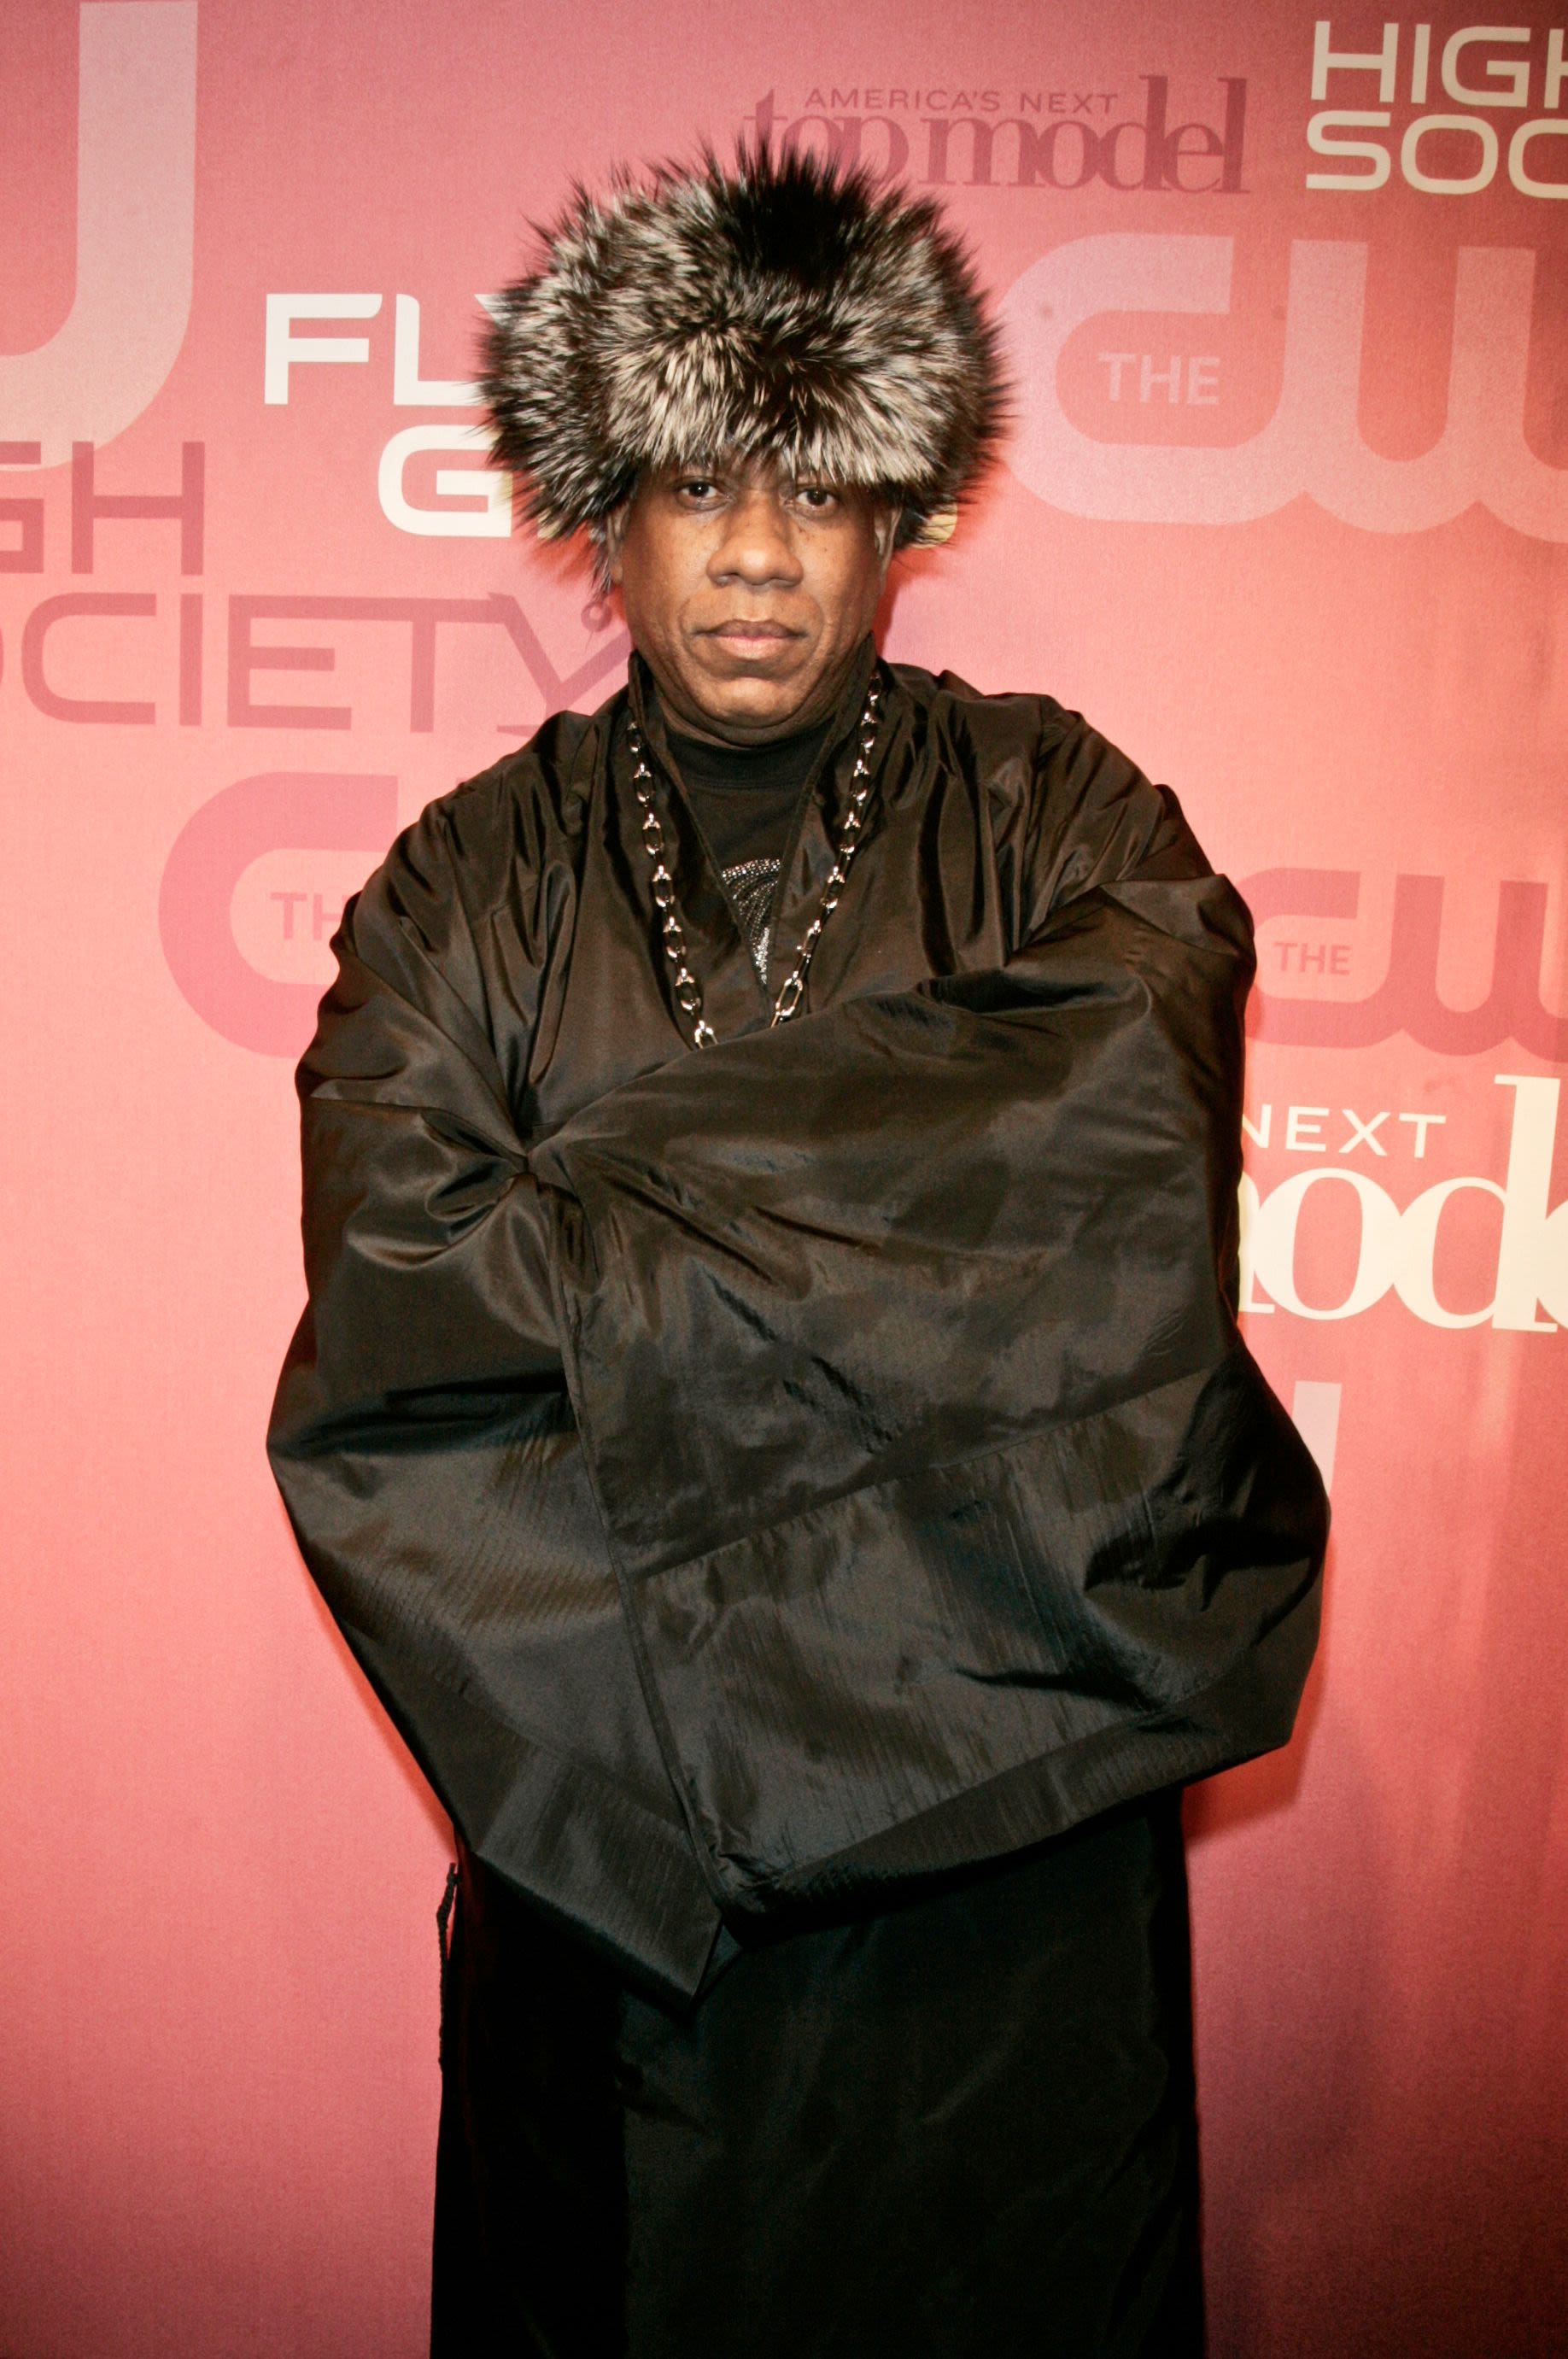 André Leon Talley, Former Vogue Creative Director, Has Died: Report